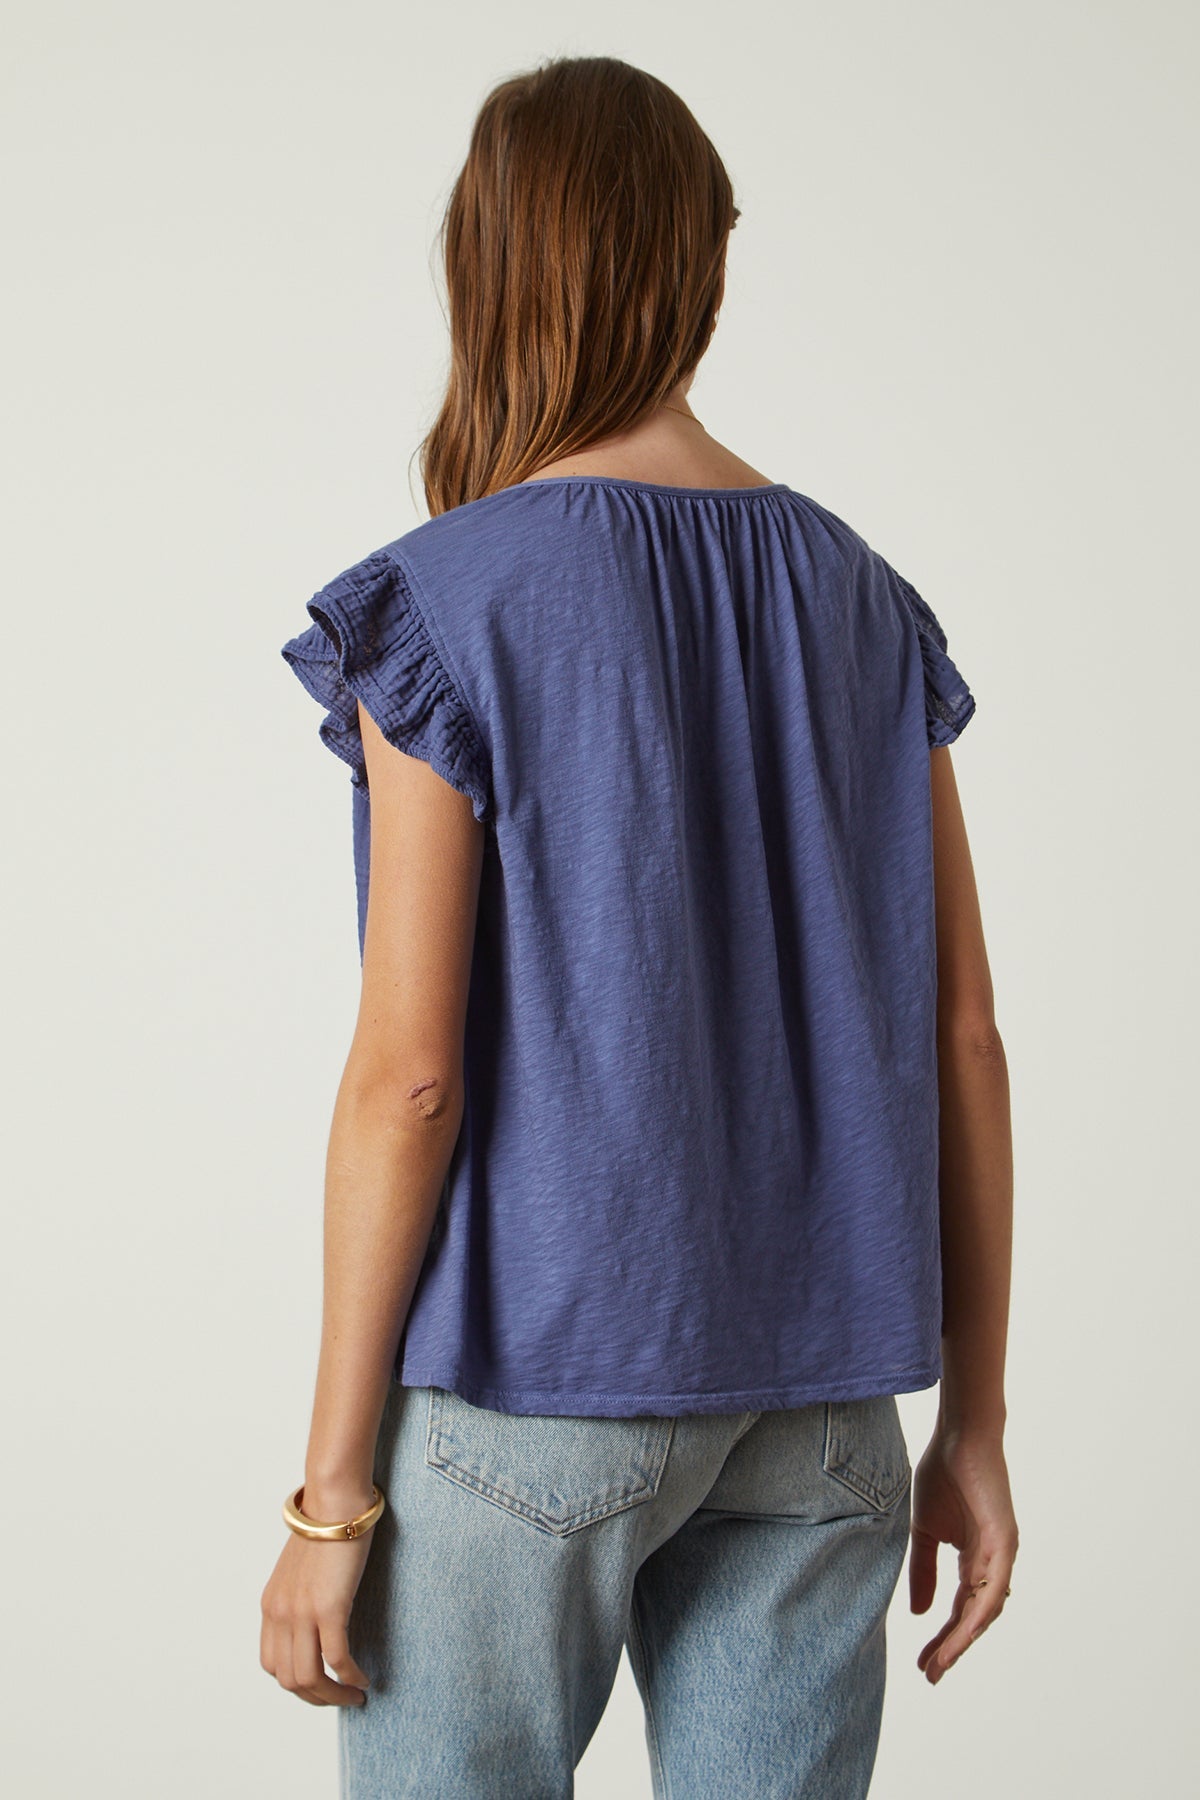 the back view of a woman wearing Velvet by Graham & Spencer's REMI RUFFLE SLEEVE TOP with blue ruffled sleeves.-26631974092993